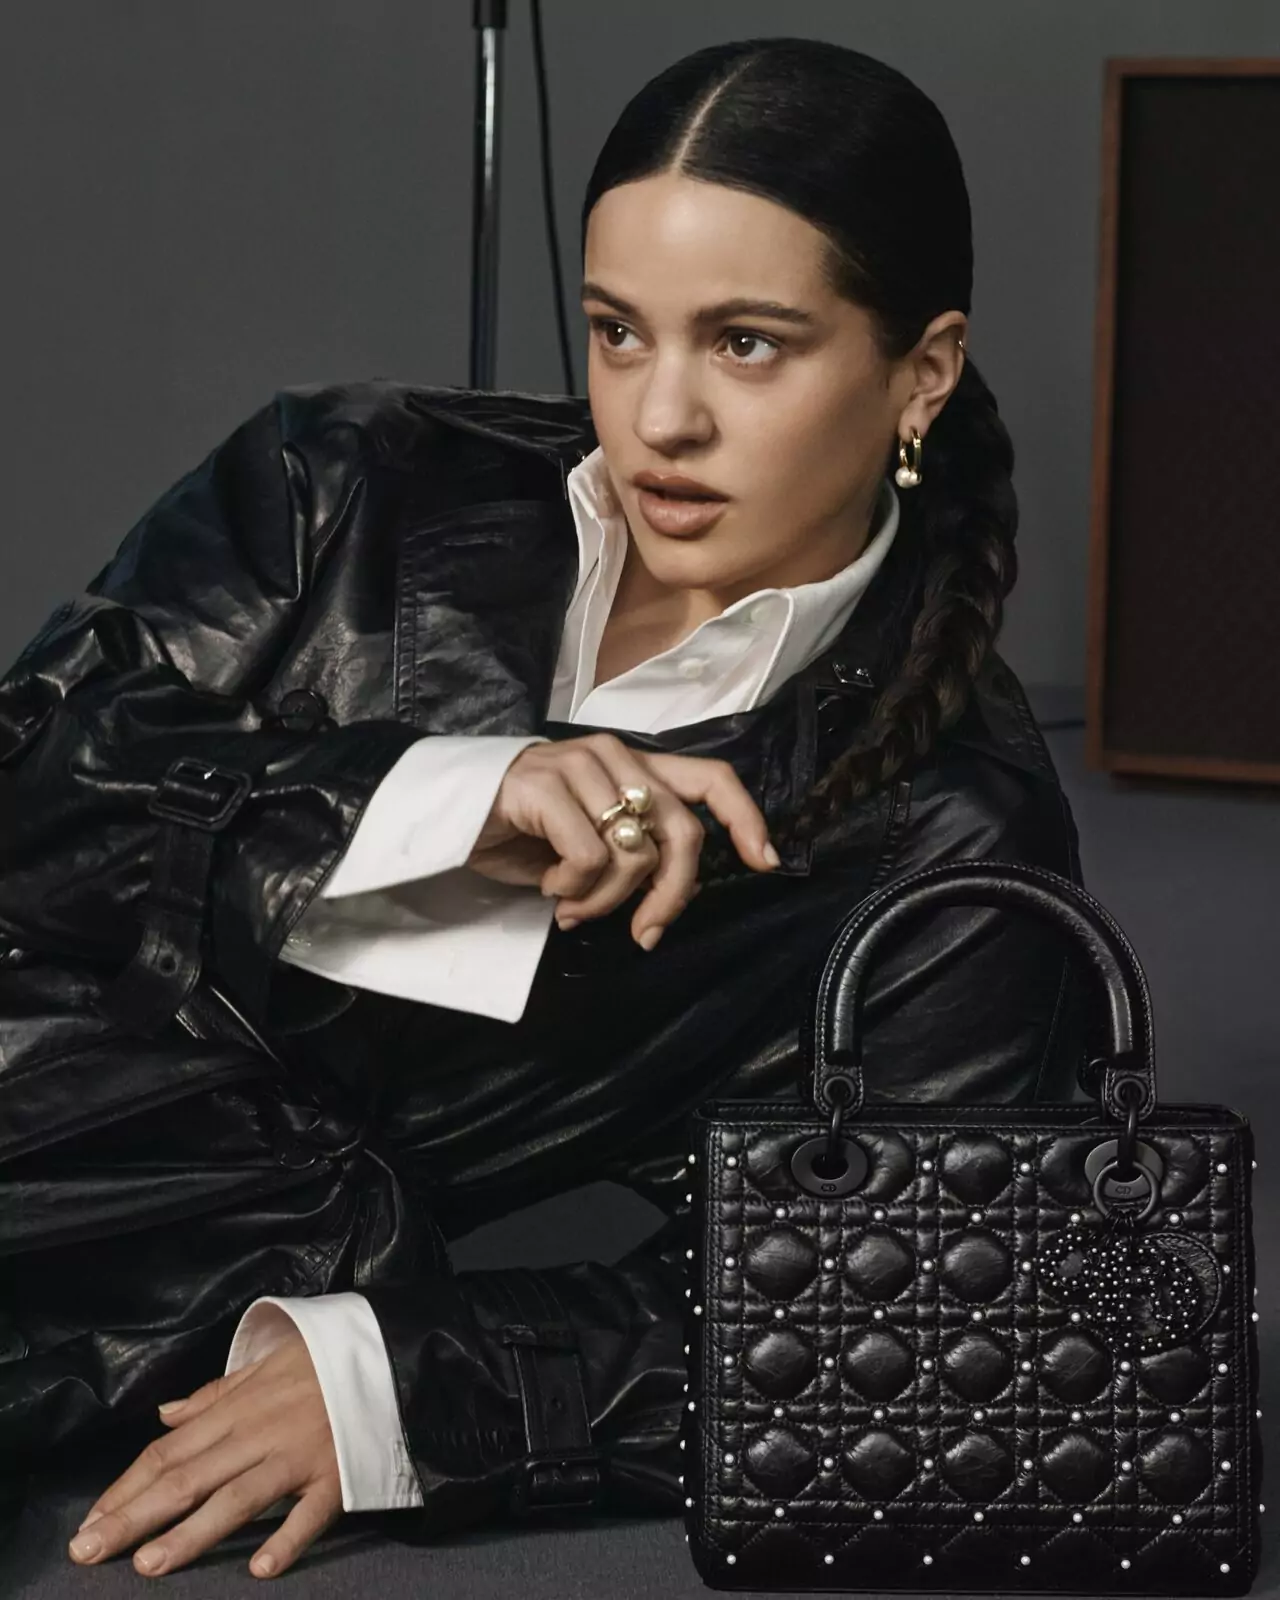 DIOR Launches LADY DIOR Campaign with ROSALÍA